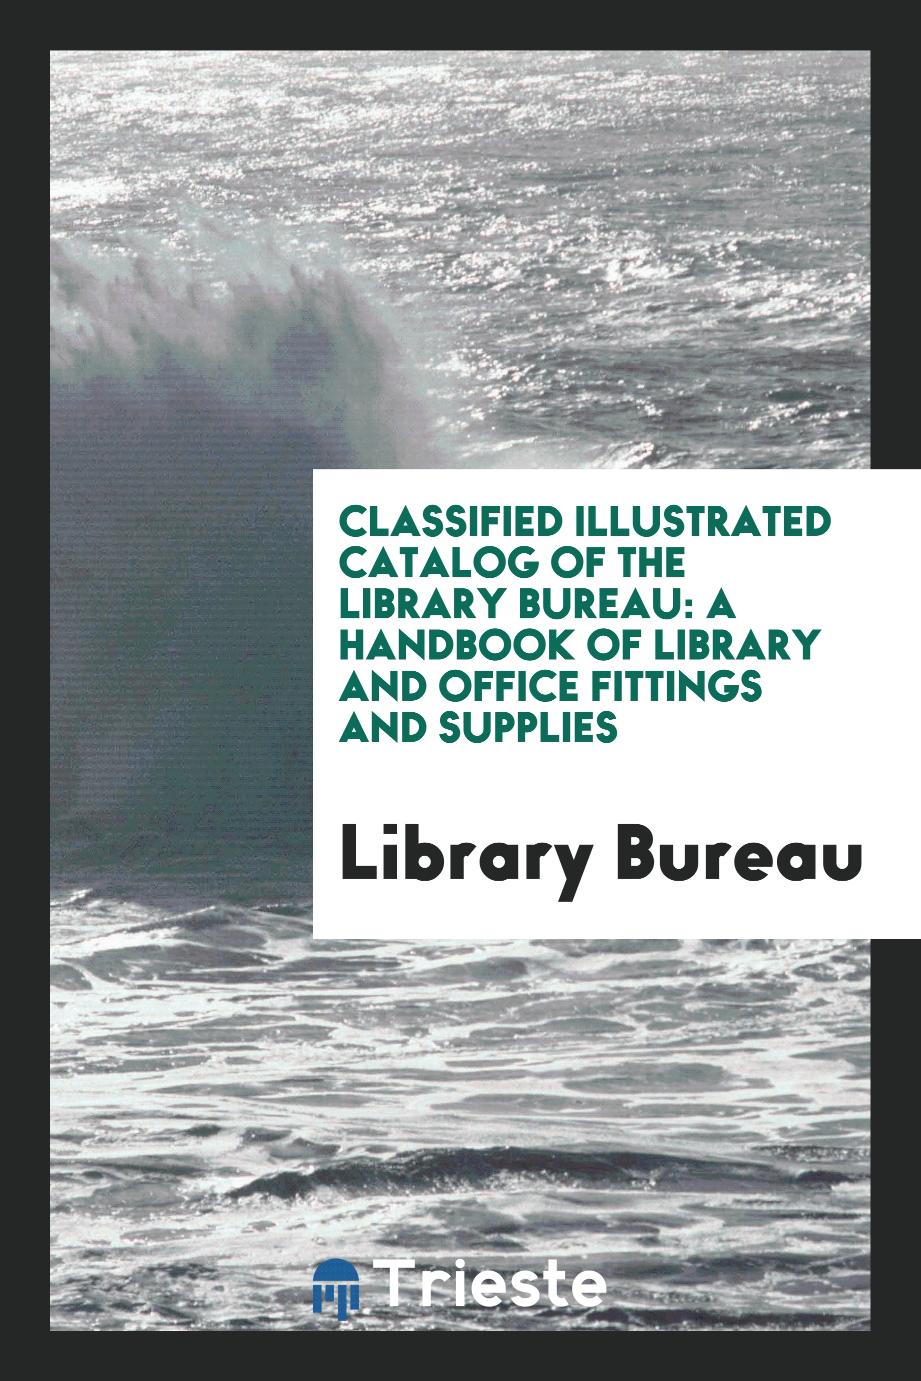 Classified Illustrated Catalog of the Library Bureau: A Handbook of Library and Office Fittings and Supplies